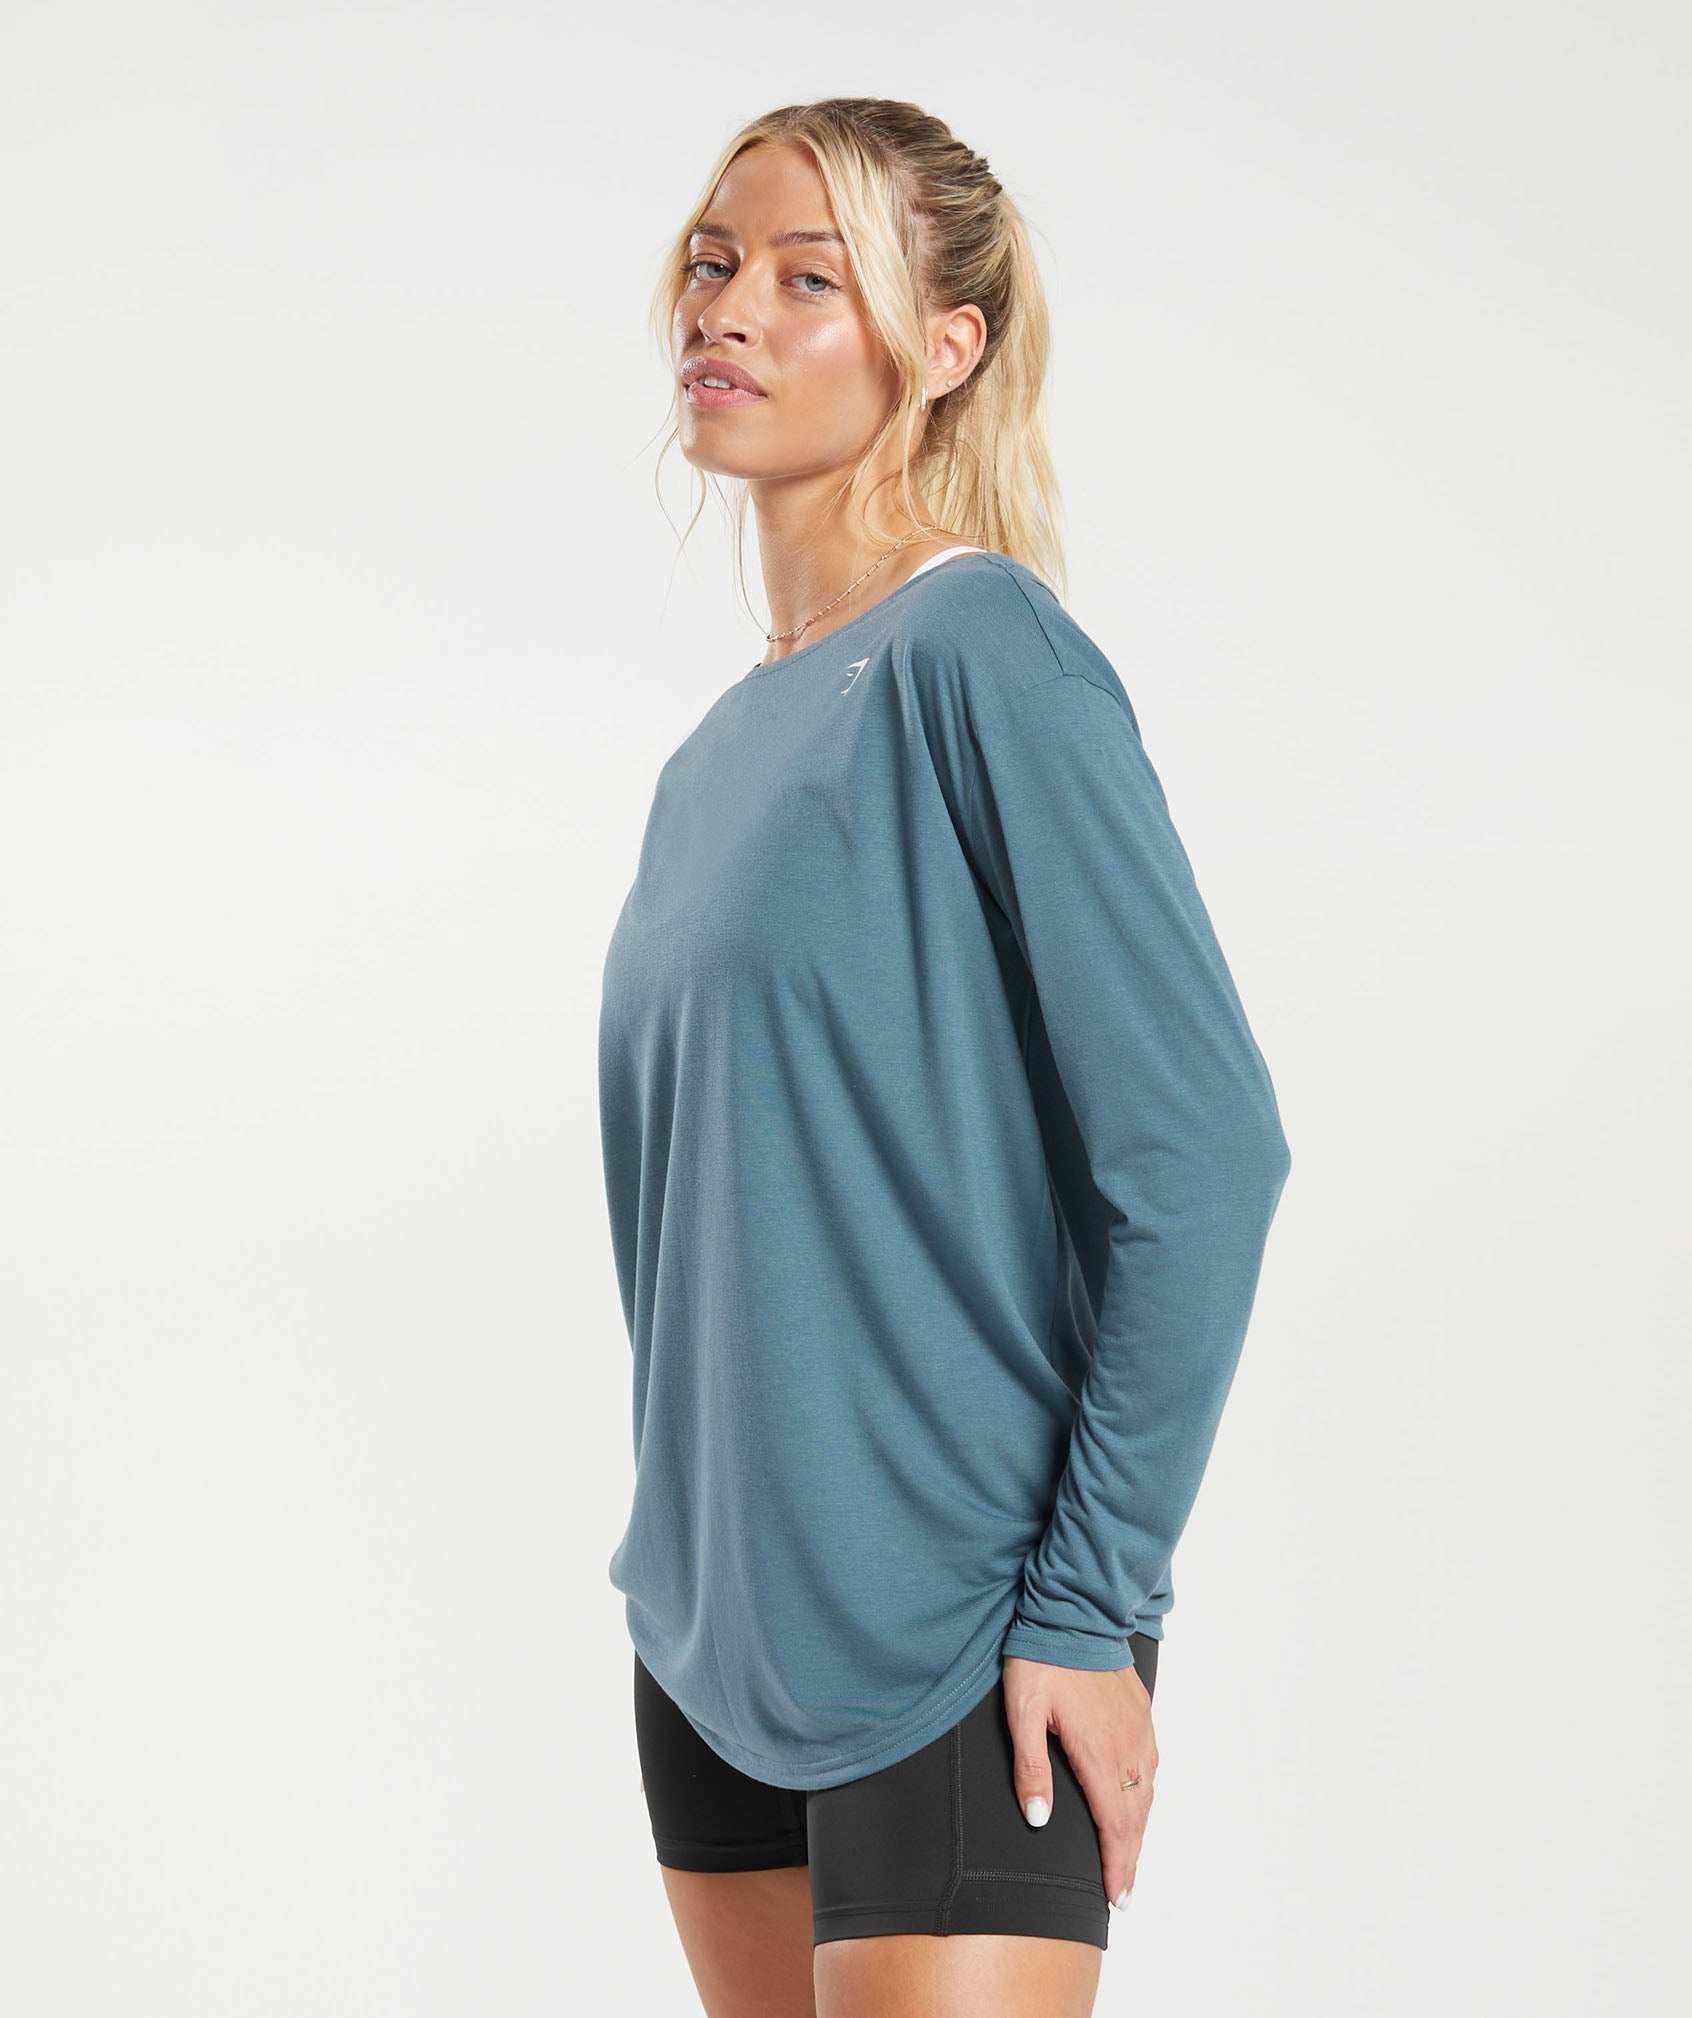 Super Soft Cut-Out Long Sleeve Top in Denim Teal - view 3